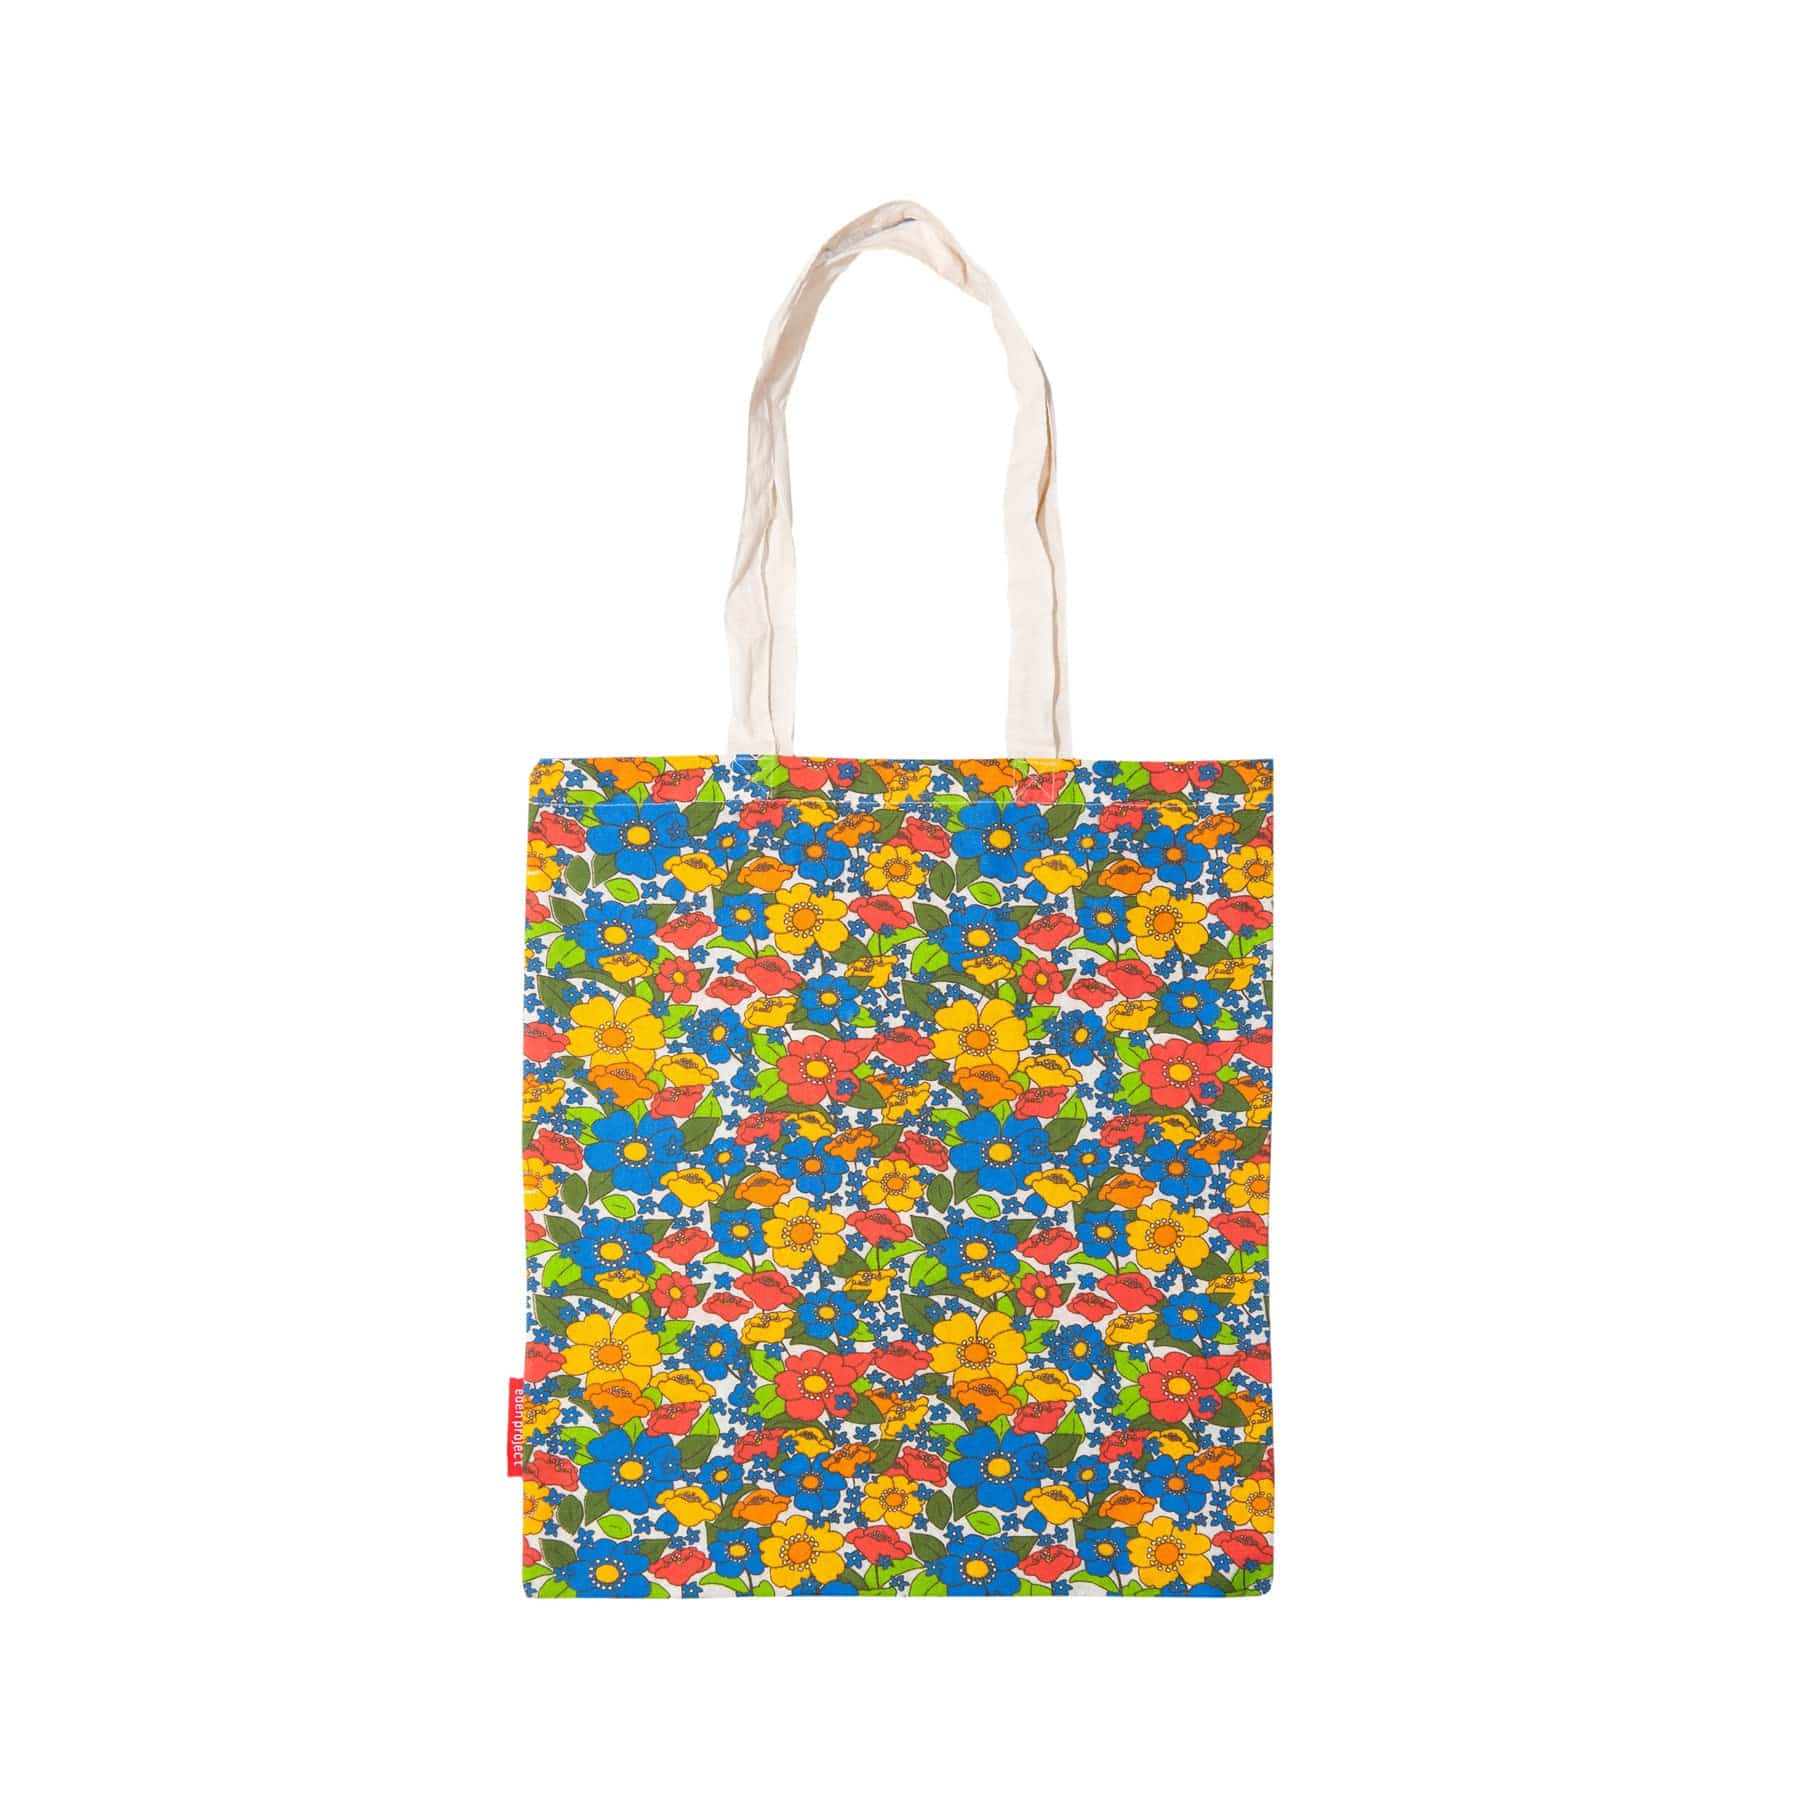 Colorful floral pattern tote bag with cotton handles on white background.